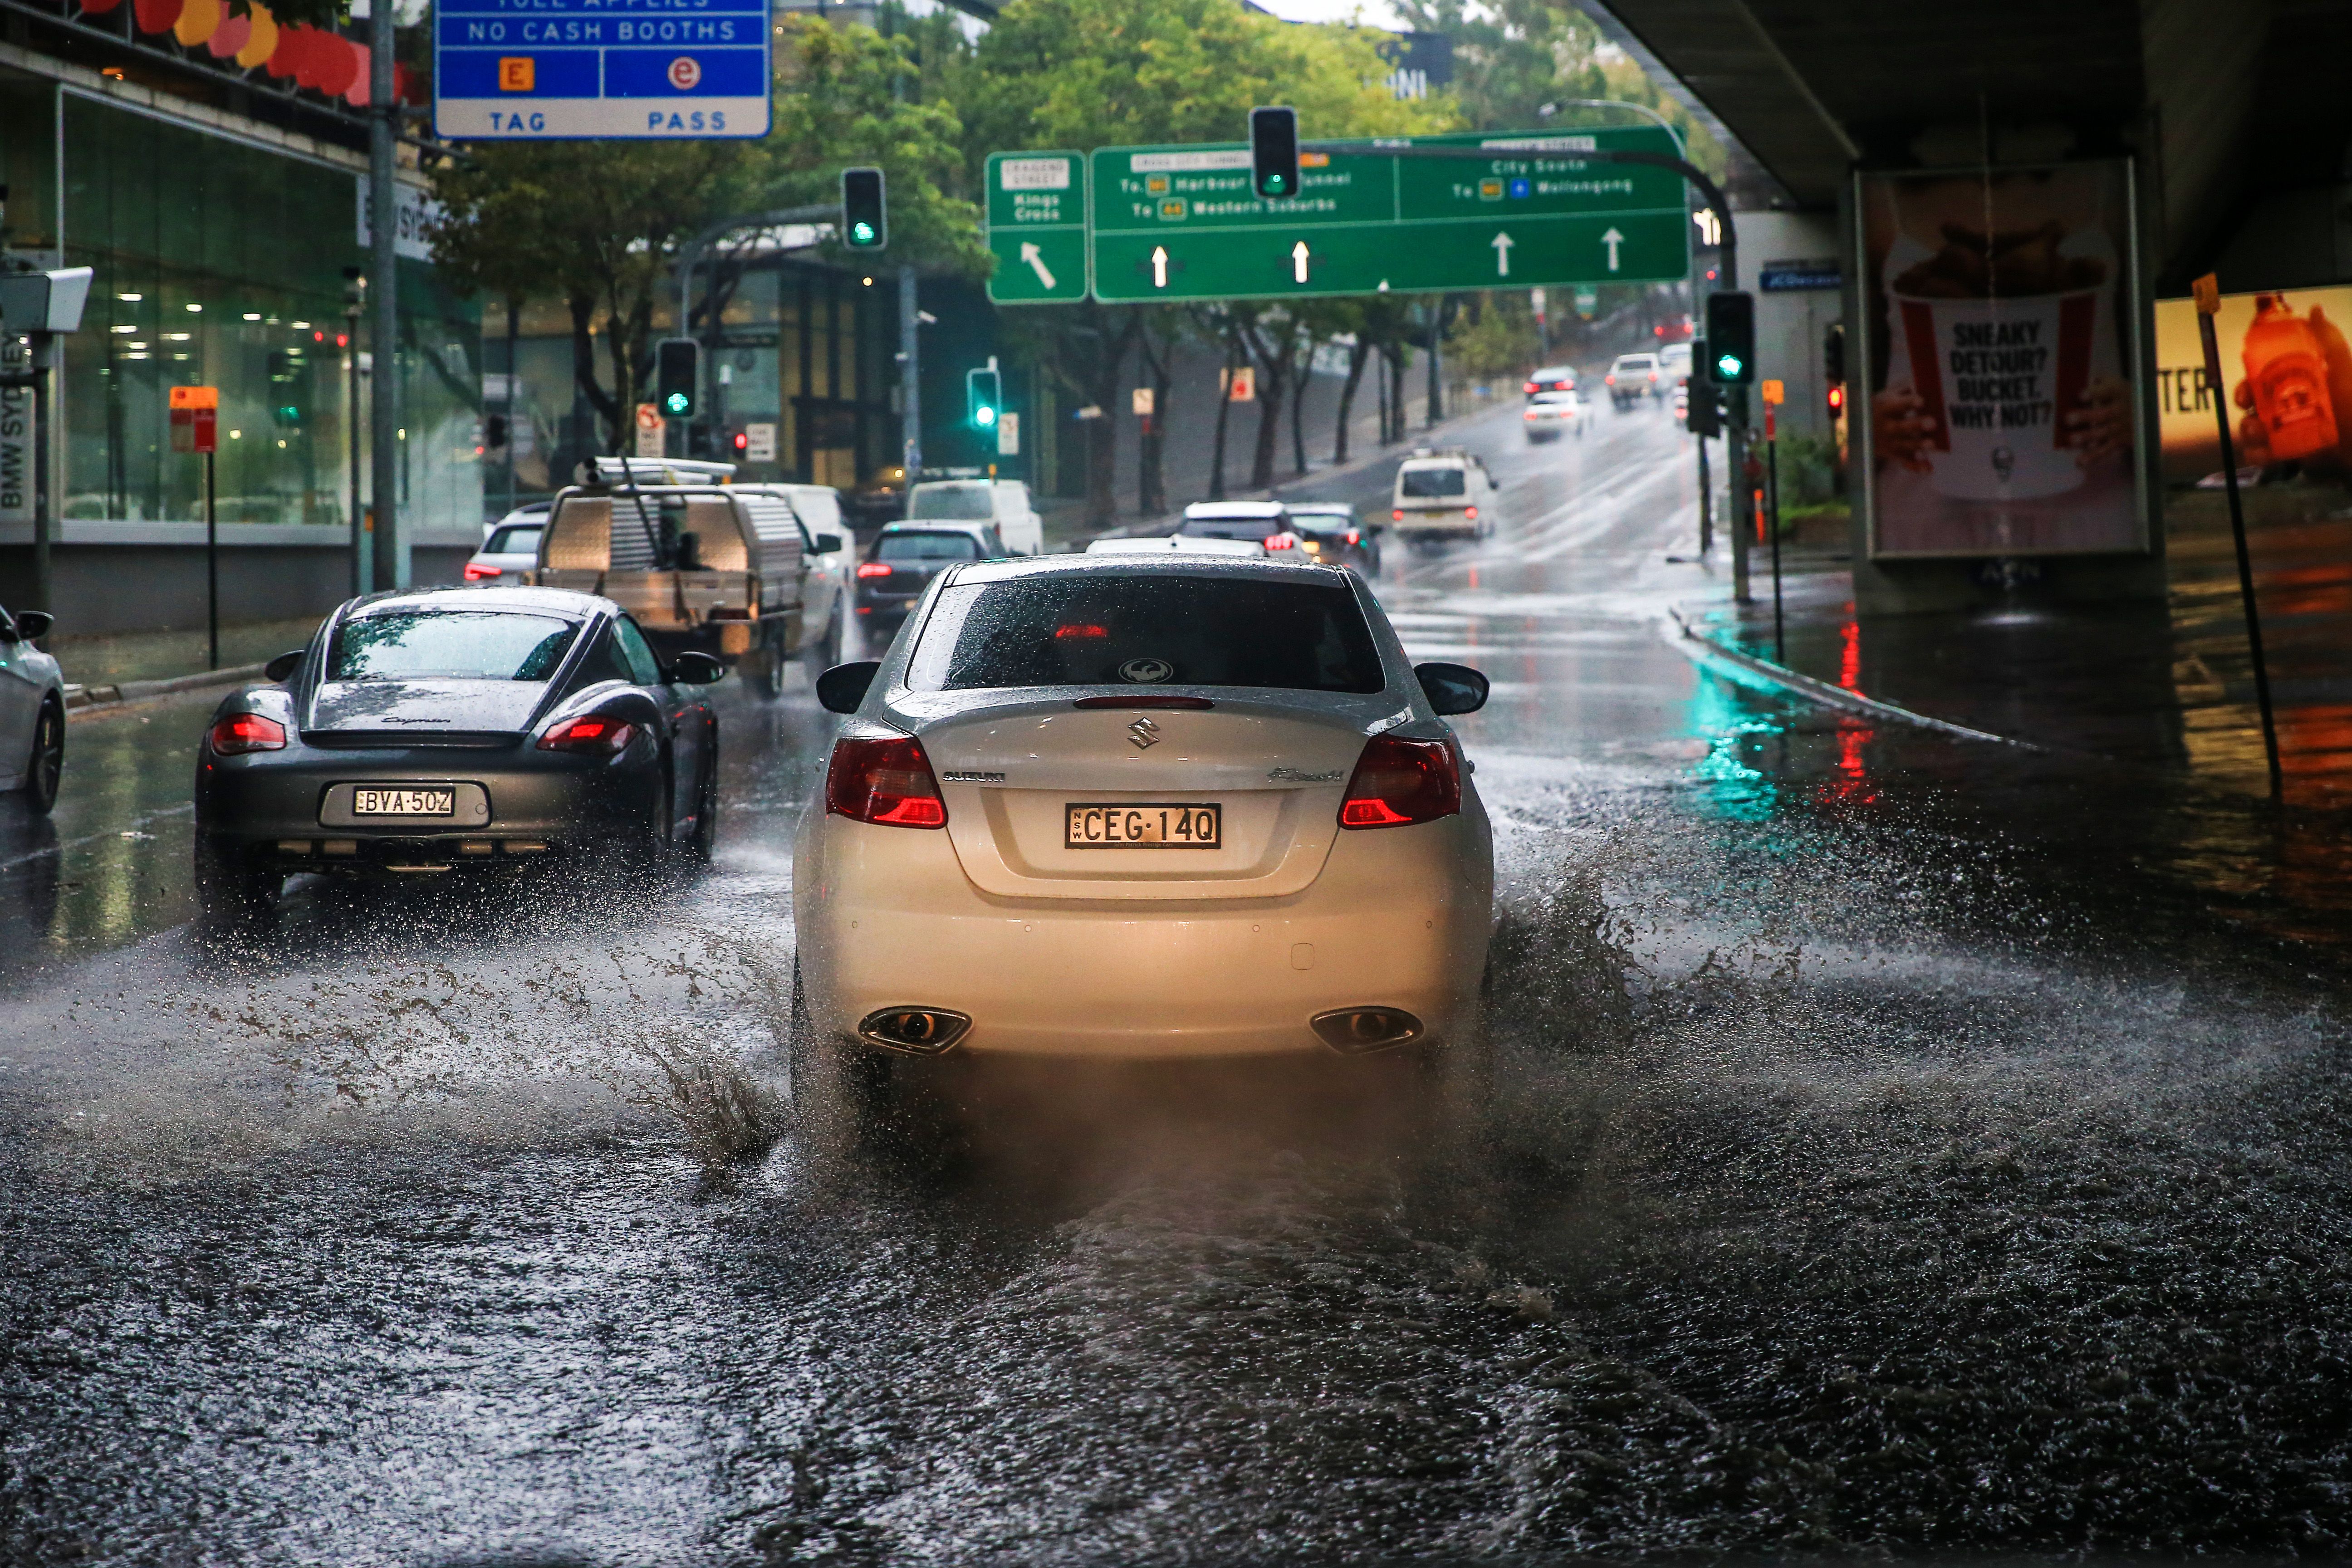 A car is seen traveling through flooded streets in Rushcutters Bay as rain falls on January 17, 2020 in Sydney